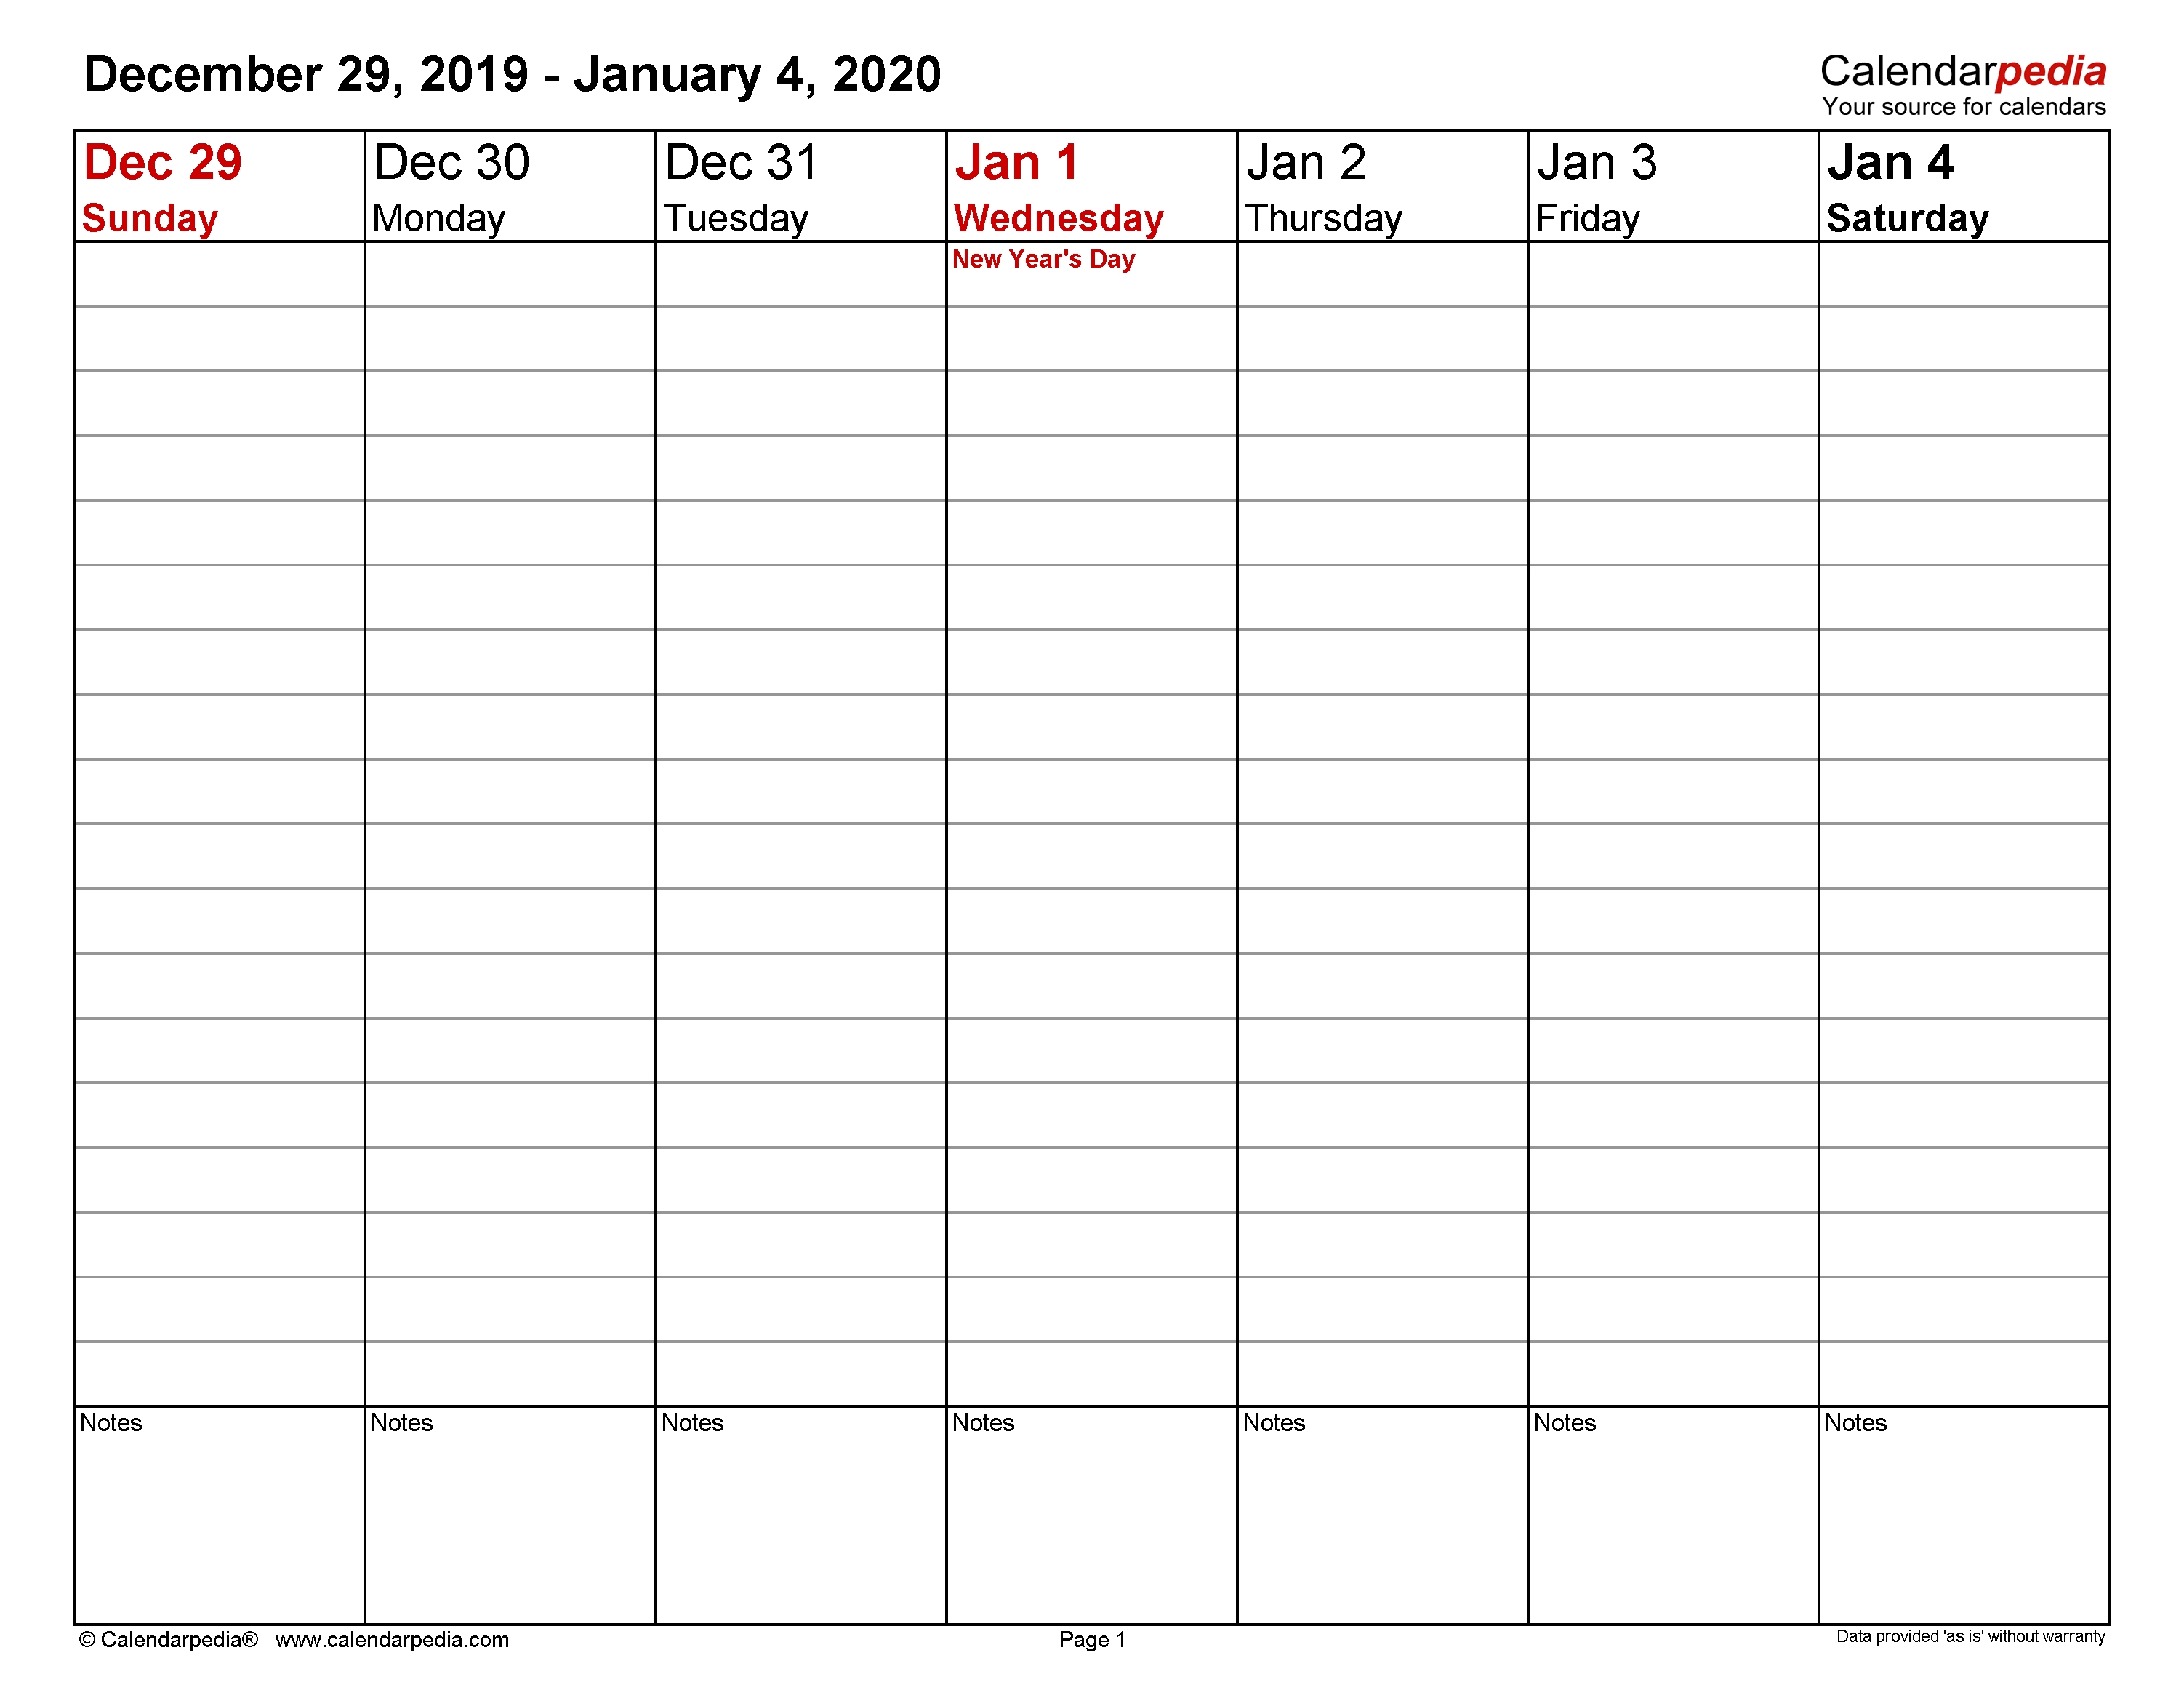 Weekly Calendars 2020 For Word - 12 Free Printable Templates-Weekly Hourly Template May Through September 2020